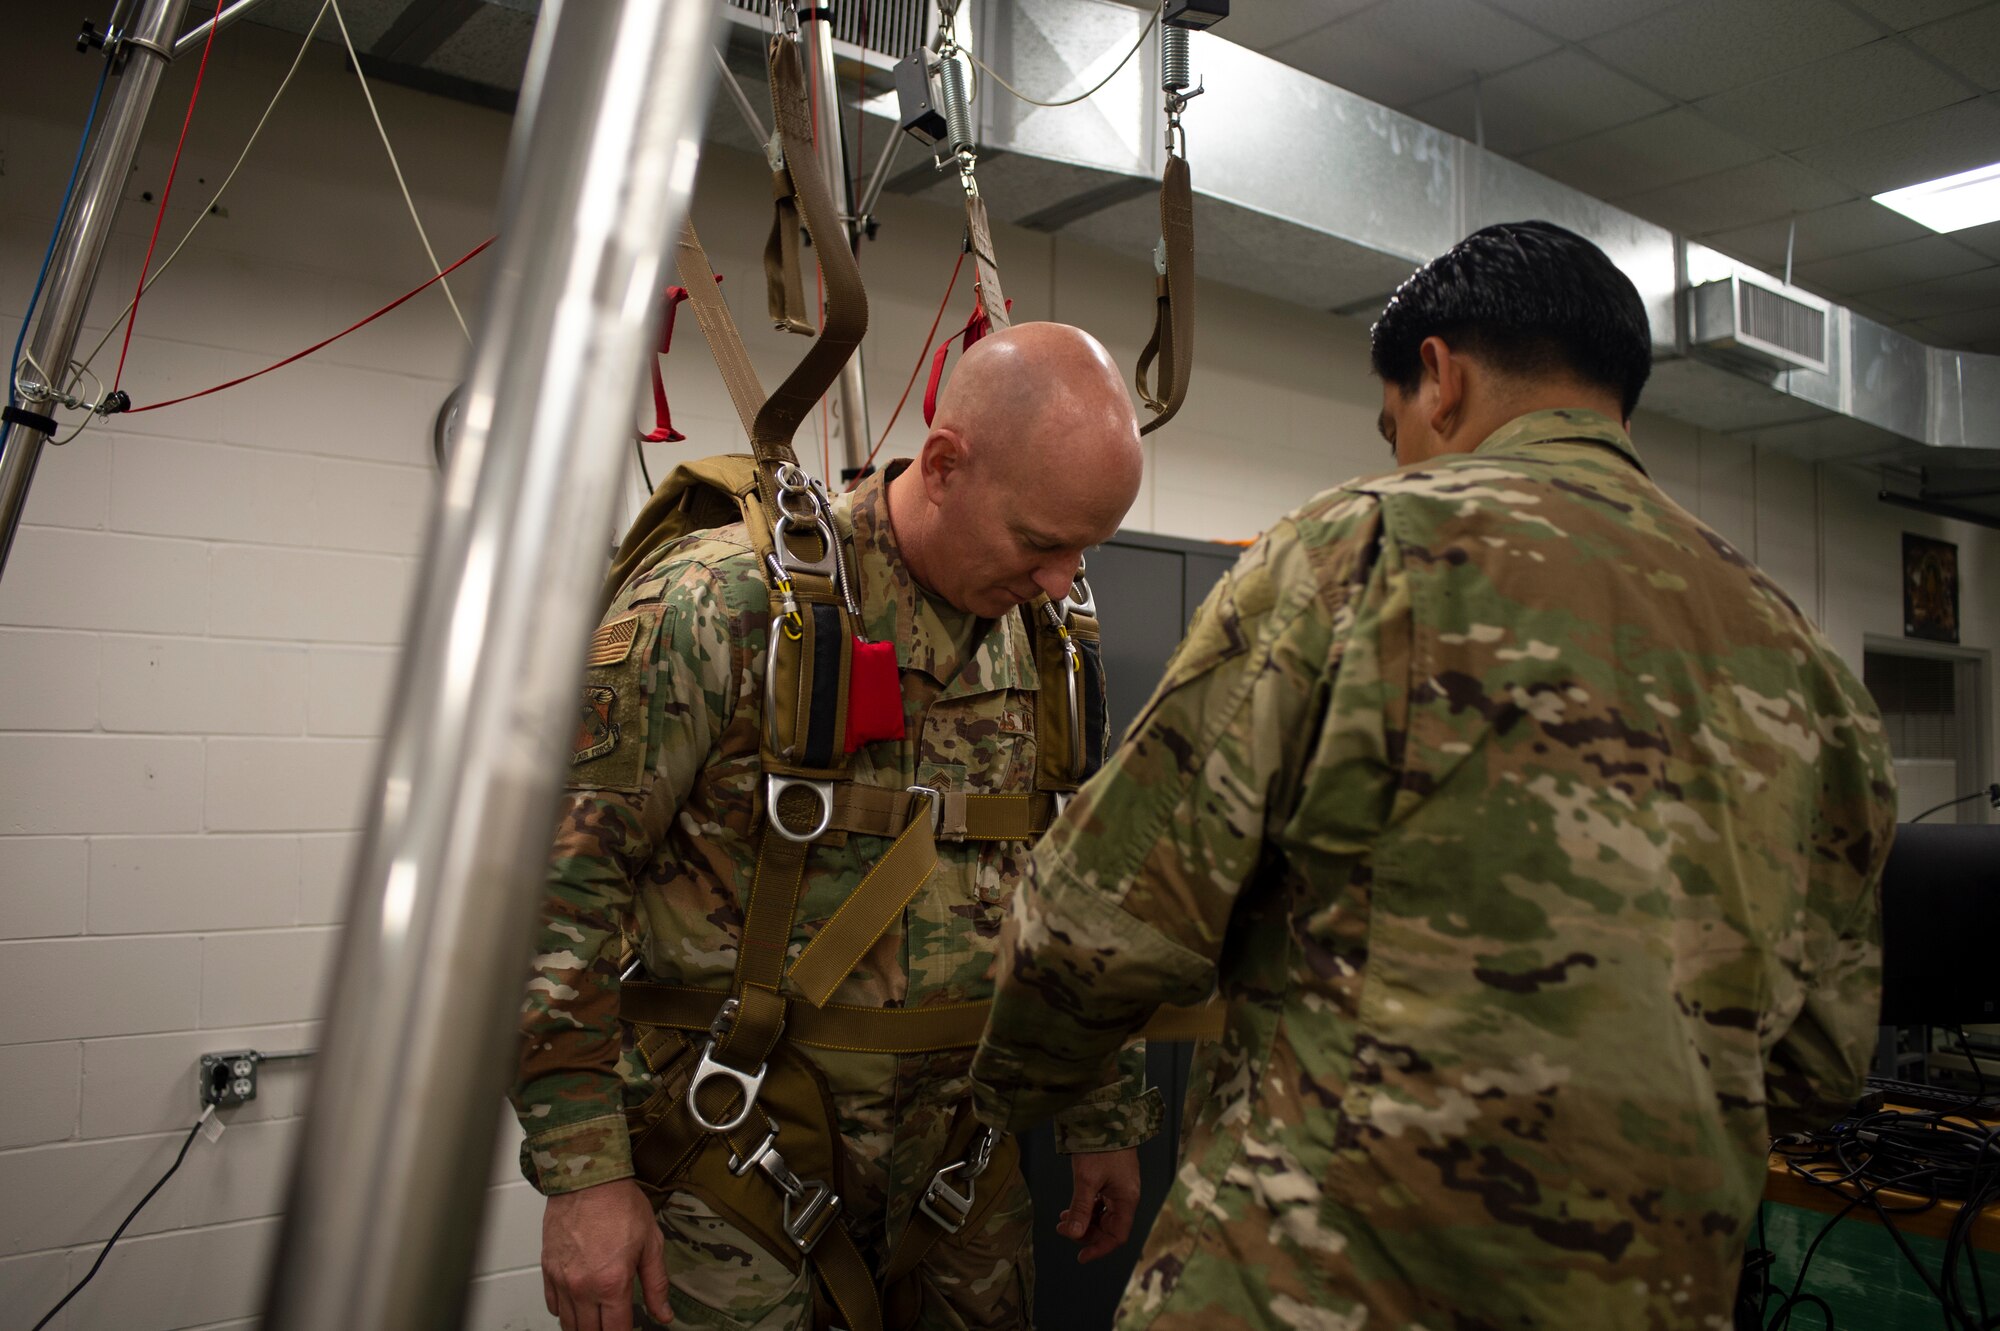 Chief Master Sgt. Daniel Simpson, the 18th Air Force command chief, gets strapped into a parachute rigger demonstration while visiting MacDill Air Force Base, Fla., Jan. 31, 2020.